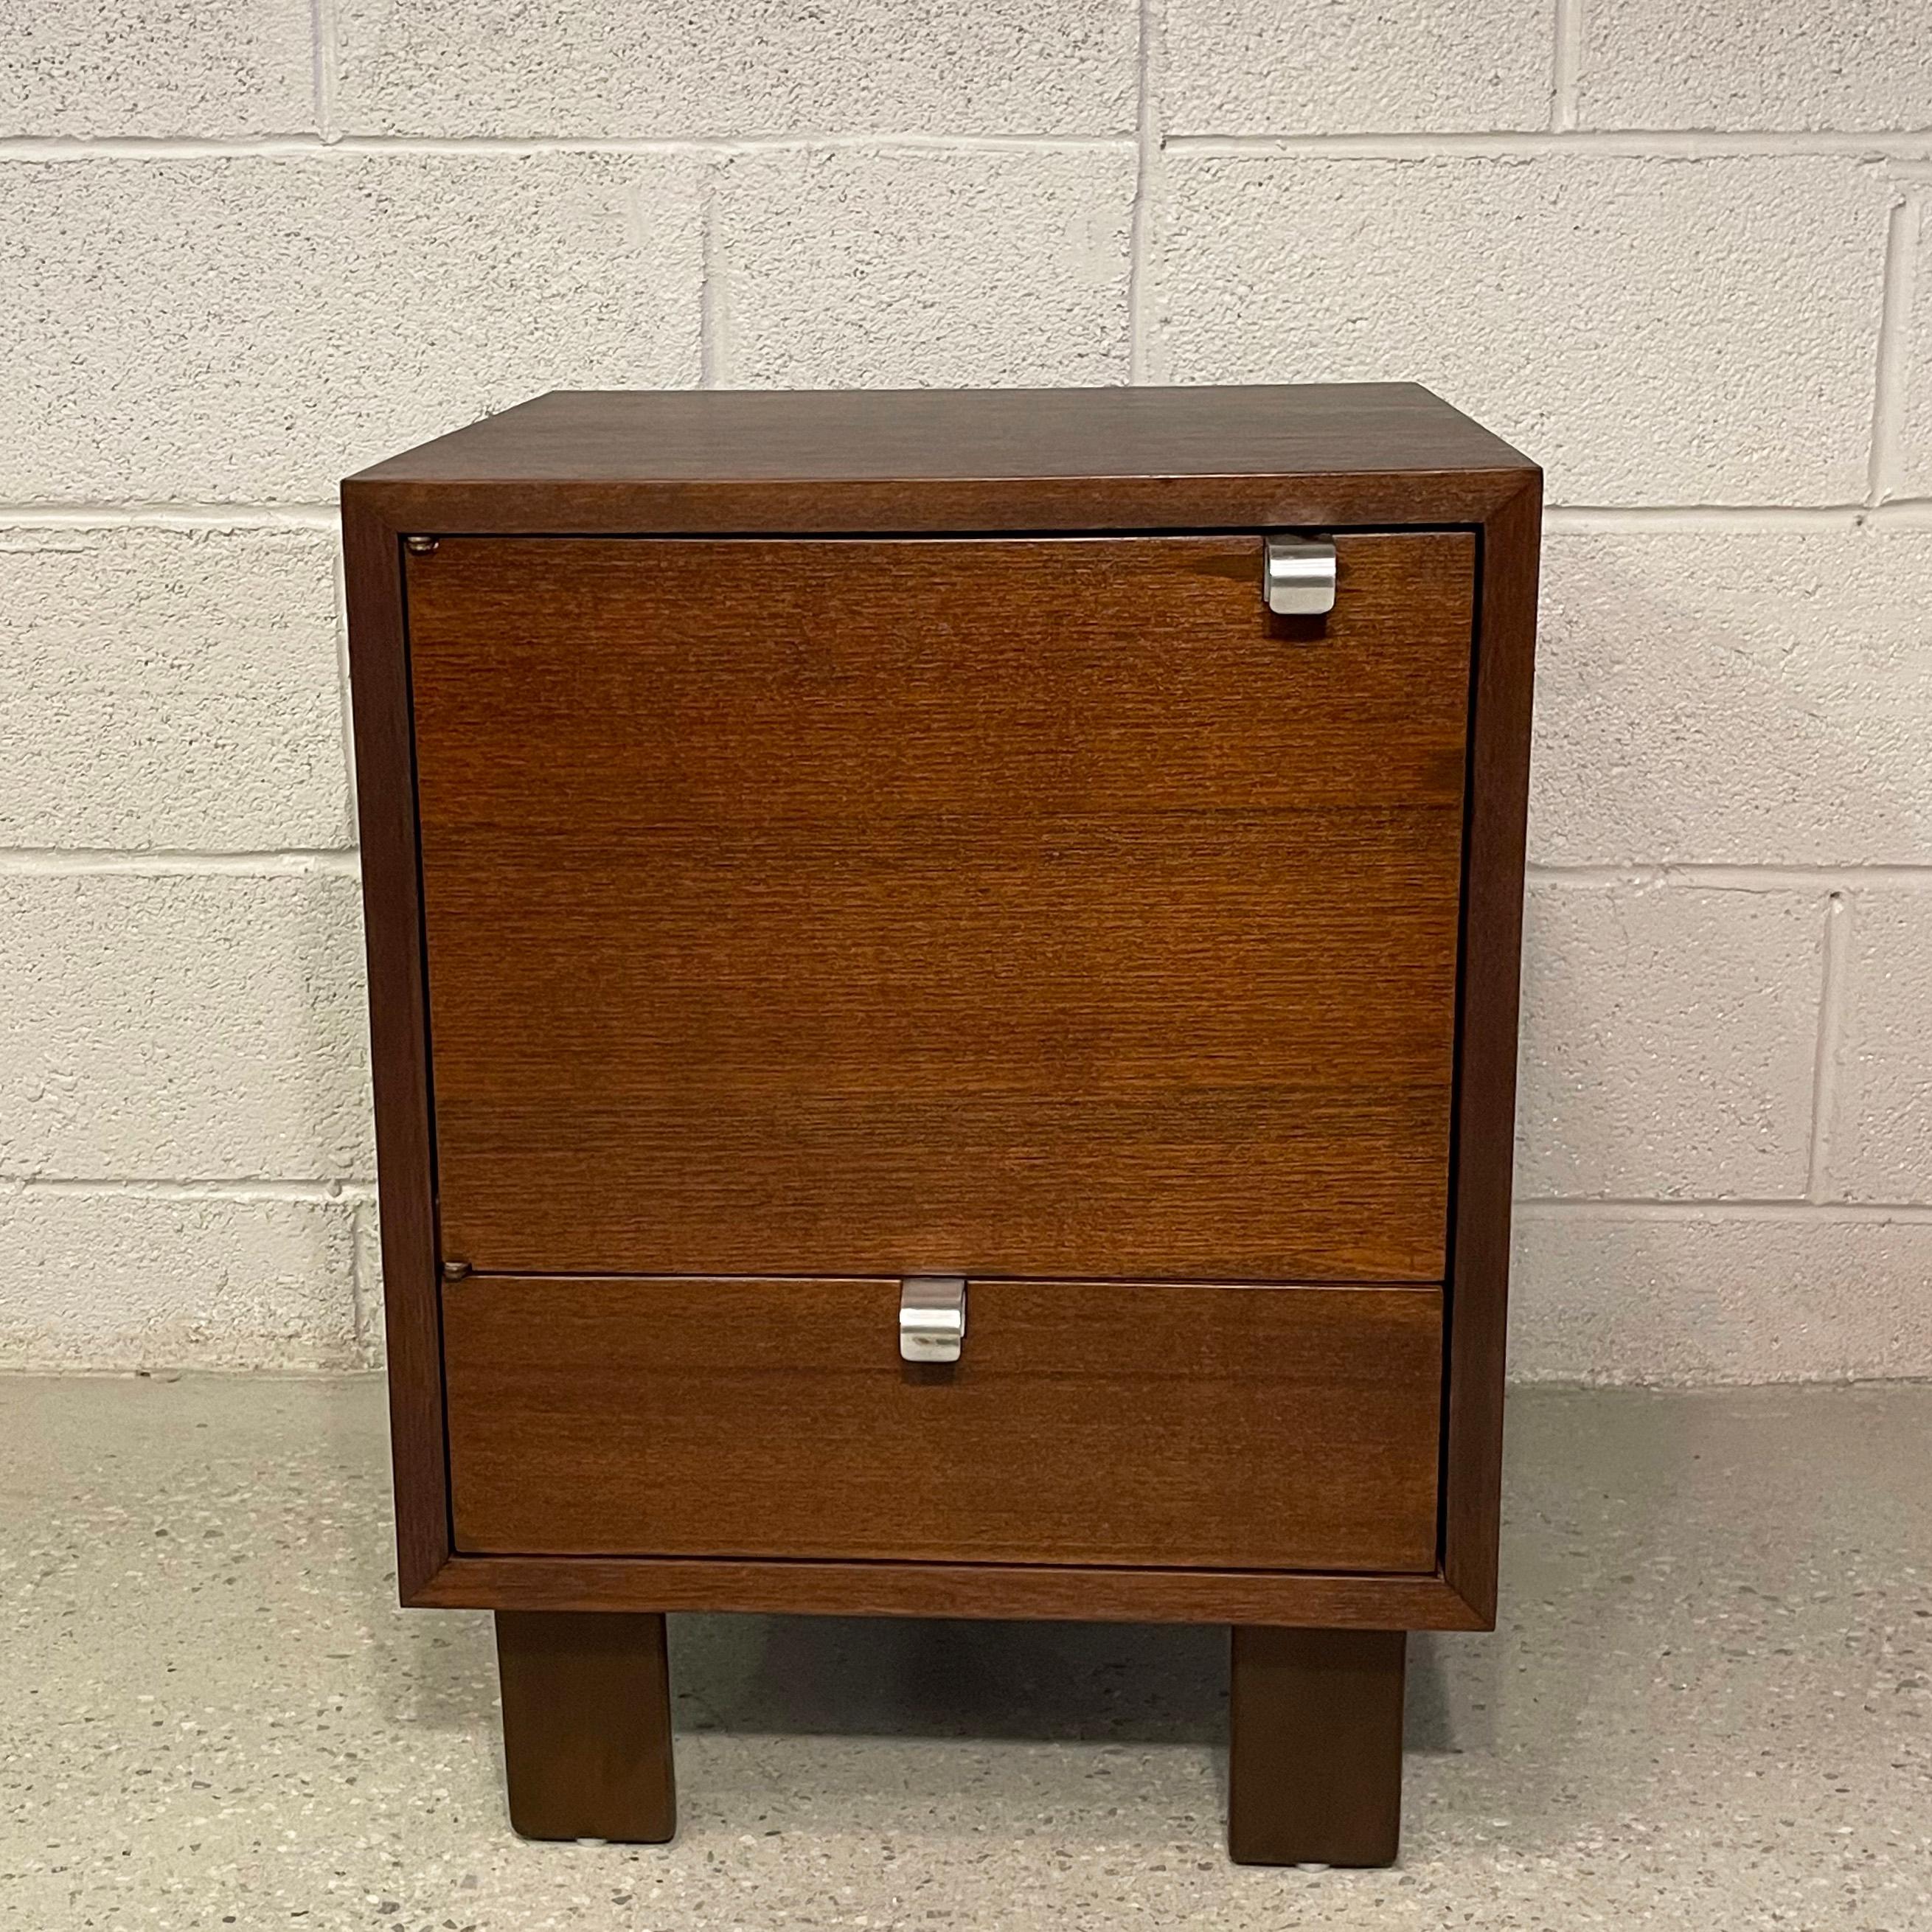 Mid-century modern, model #4617, walnut nightstand or end table by George Nelson For Herman Miller features closed storage with signature, steel J pulls. Iconic, American, mid-century design.